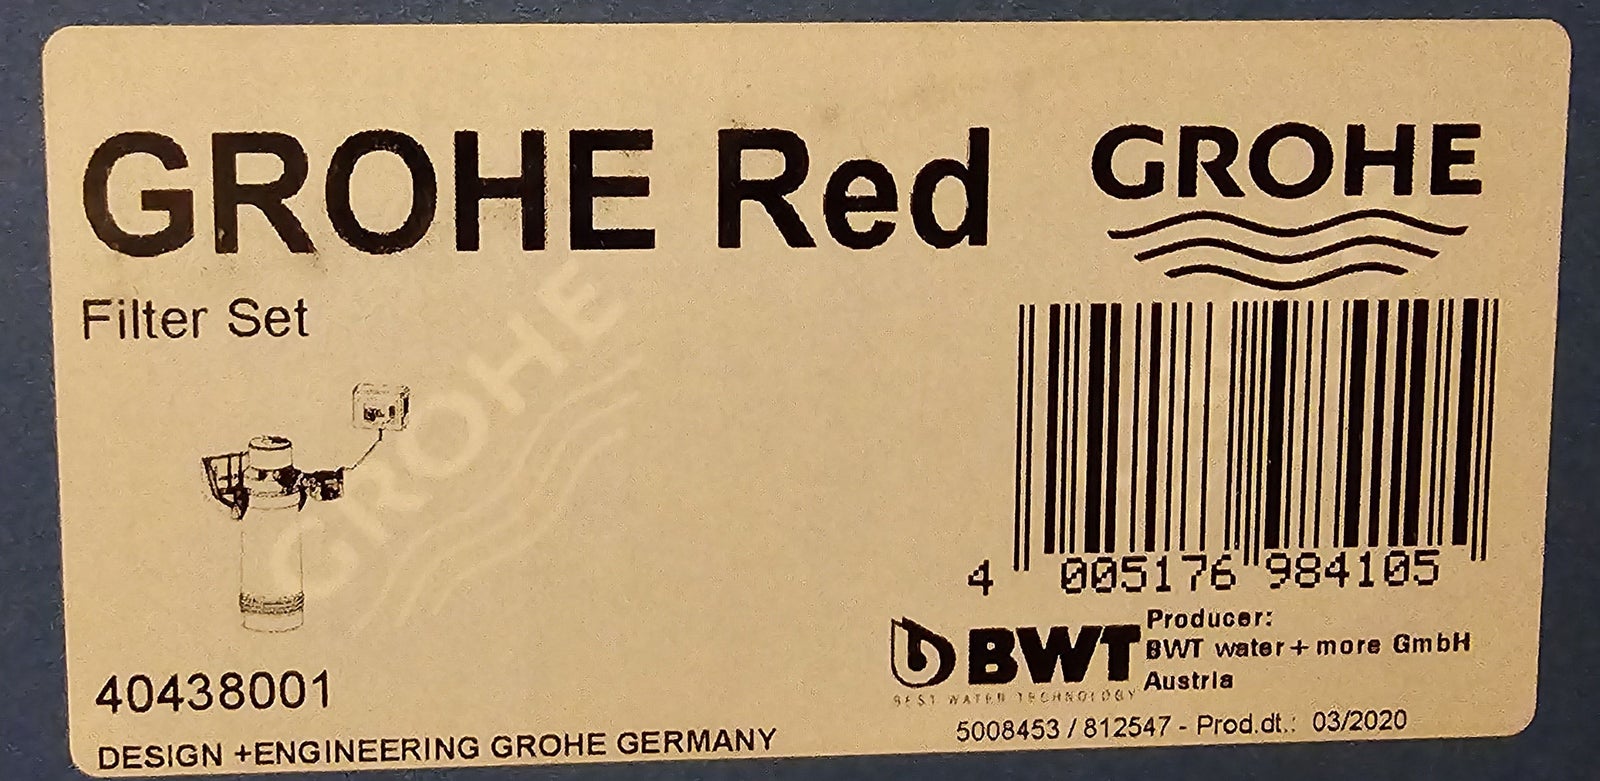 Grohe Red filter set